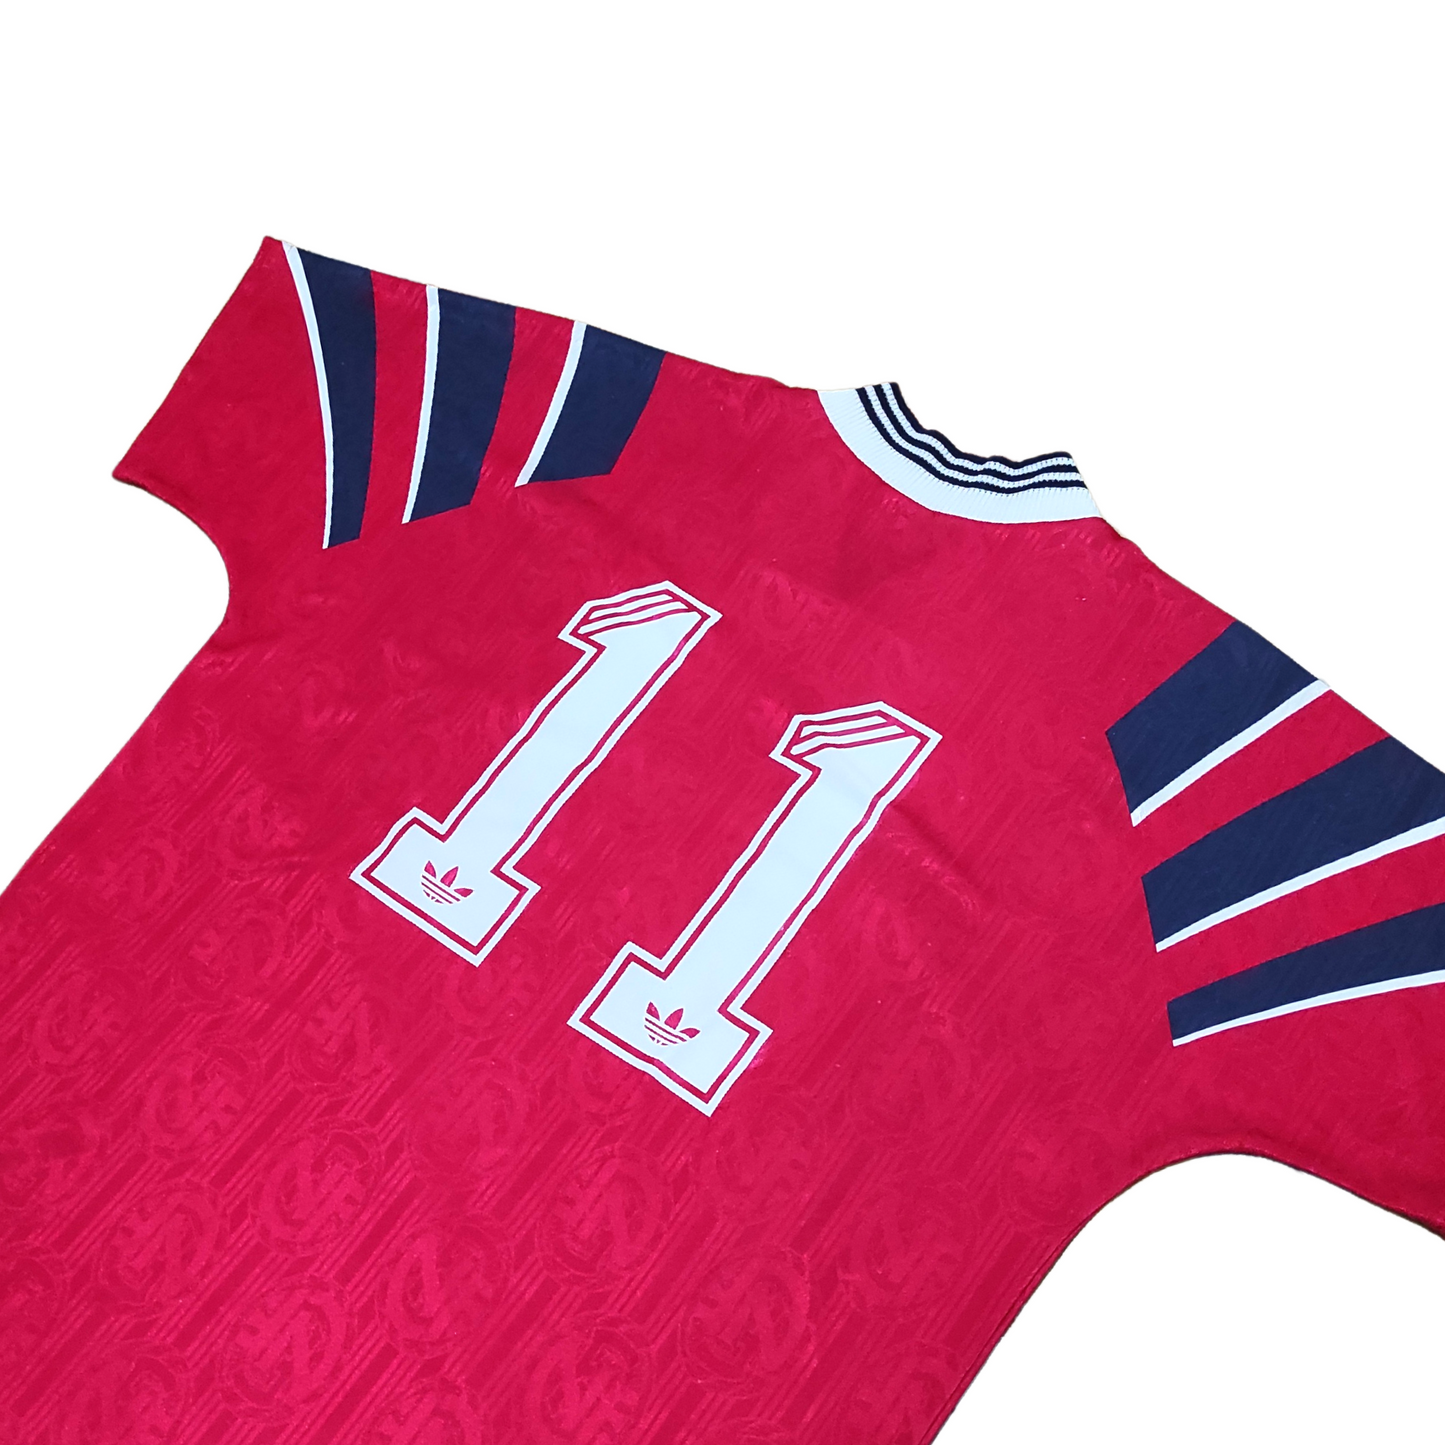 Norway Home Shirt 1996-1998 #8 (L)